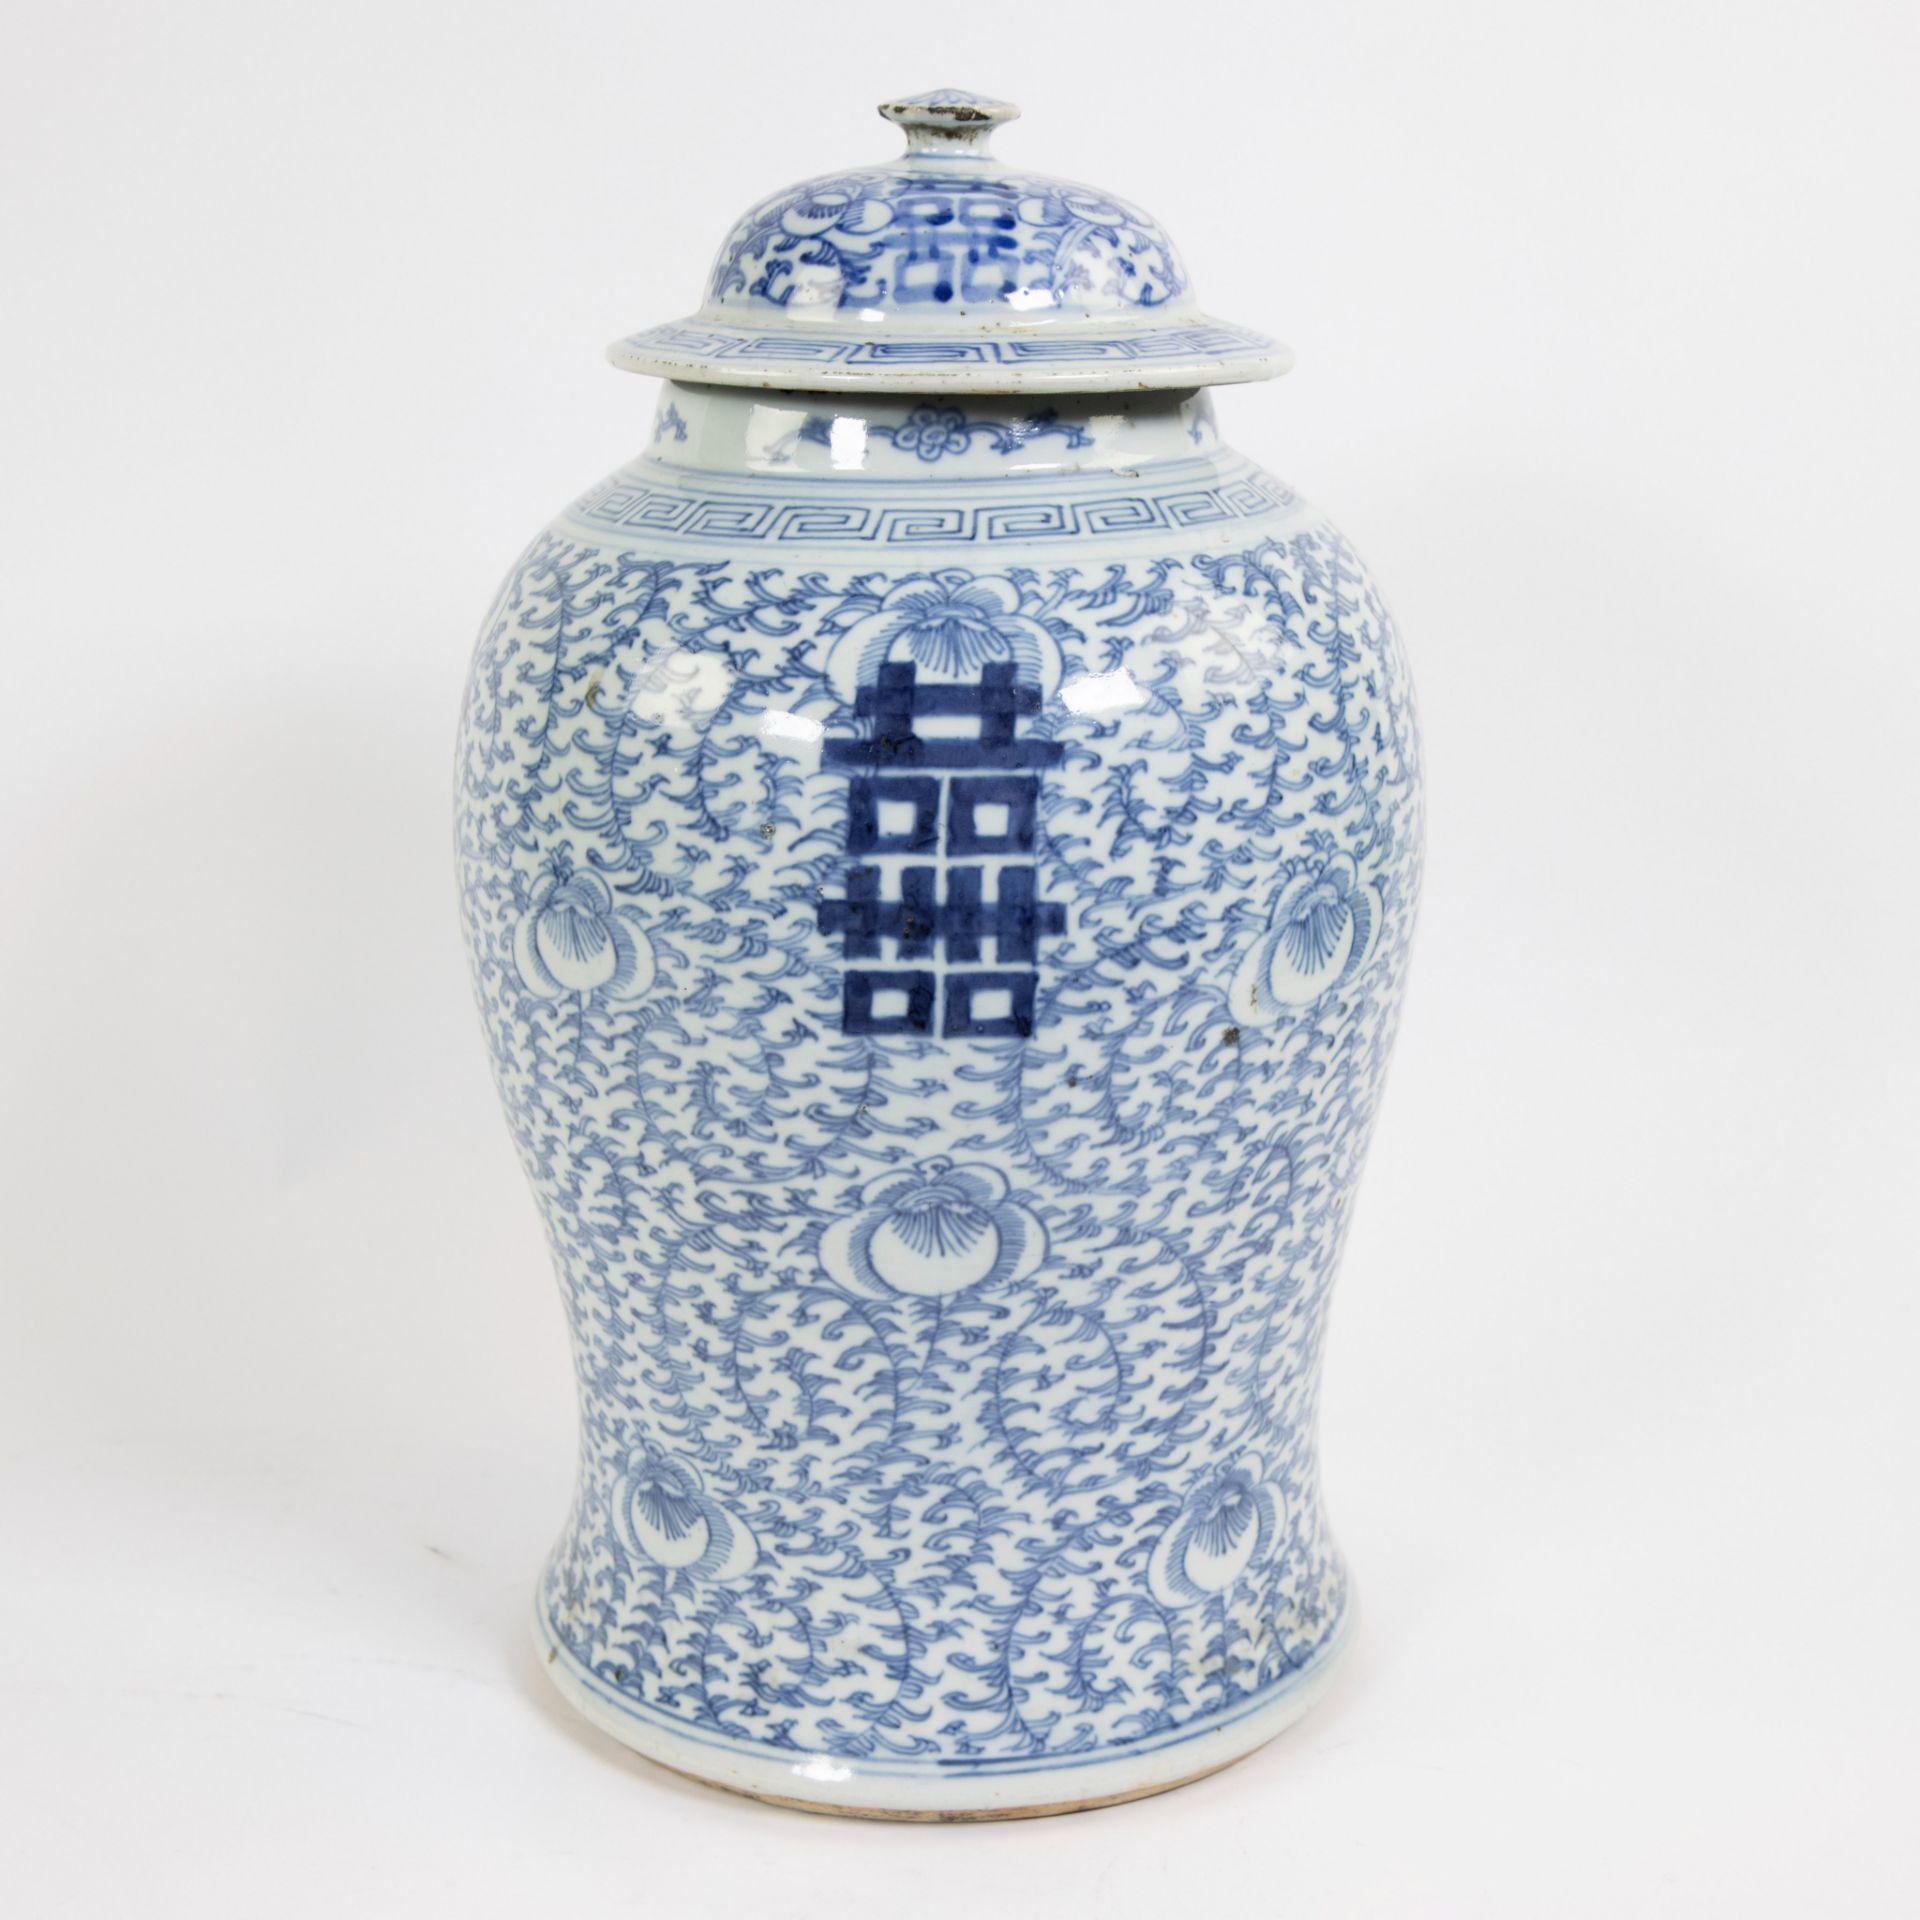 A blue and white Chinese celadon porcelain vase and cover, 19th C. - Image 2 of 8